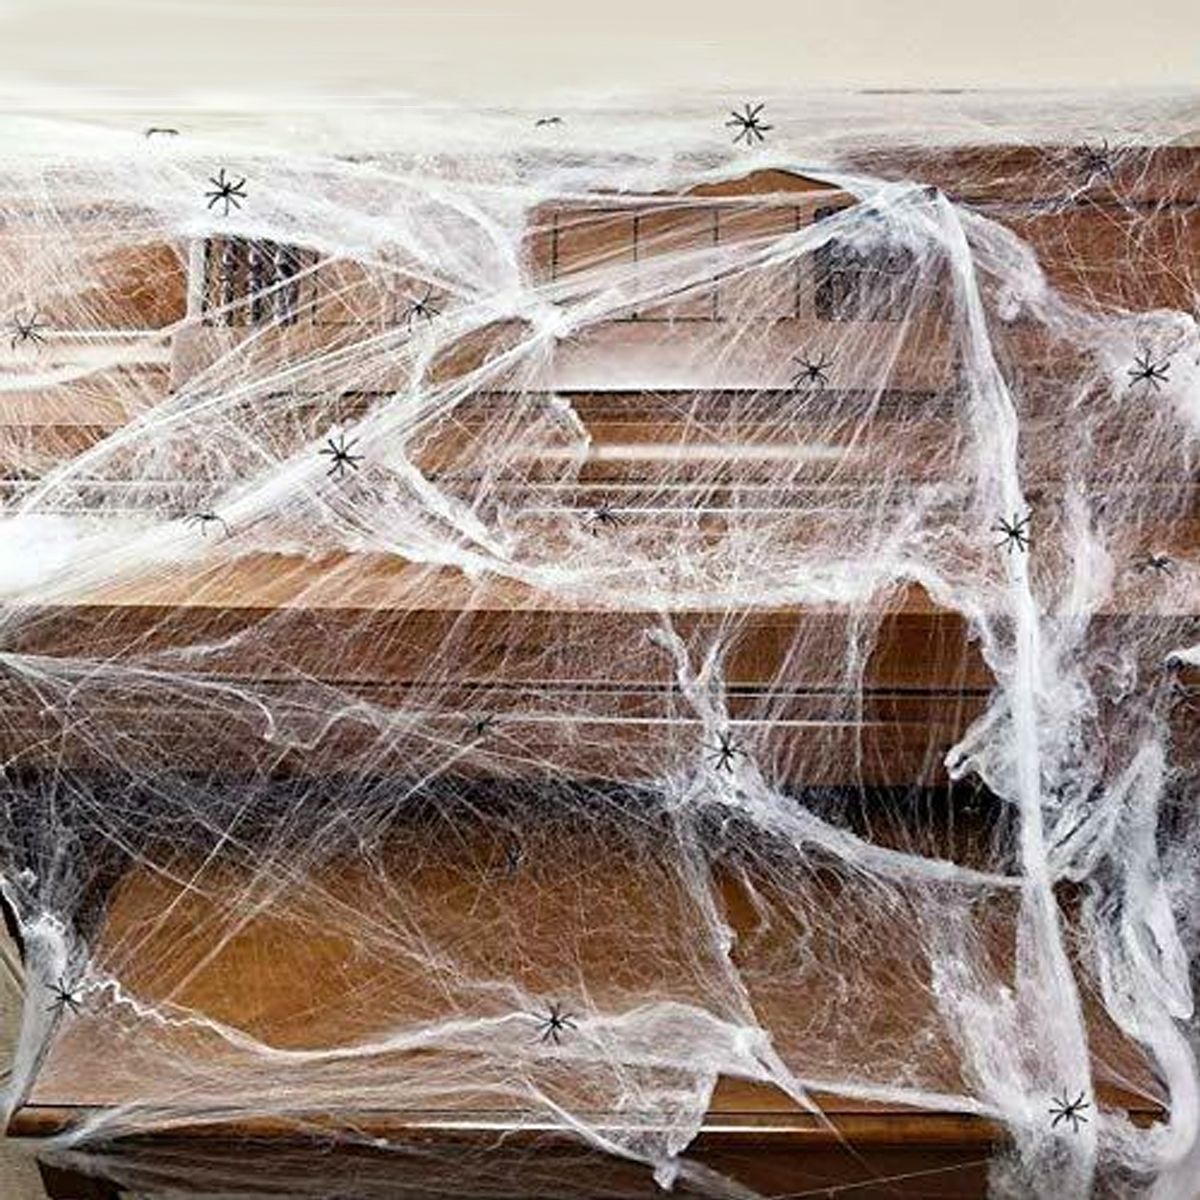 250g-Spider-Web-With-48Pcs-Small-Spiders-Halloween-Outdoor-Party-Decorations-Props-Supplies-1730880